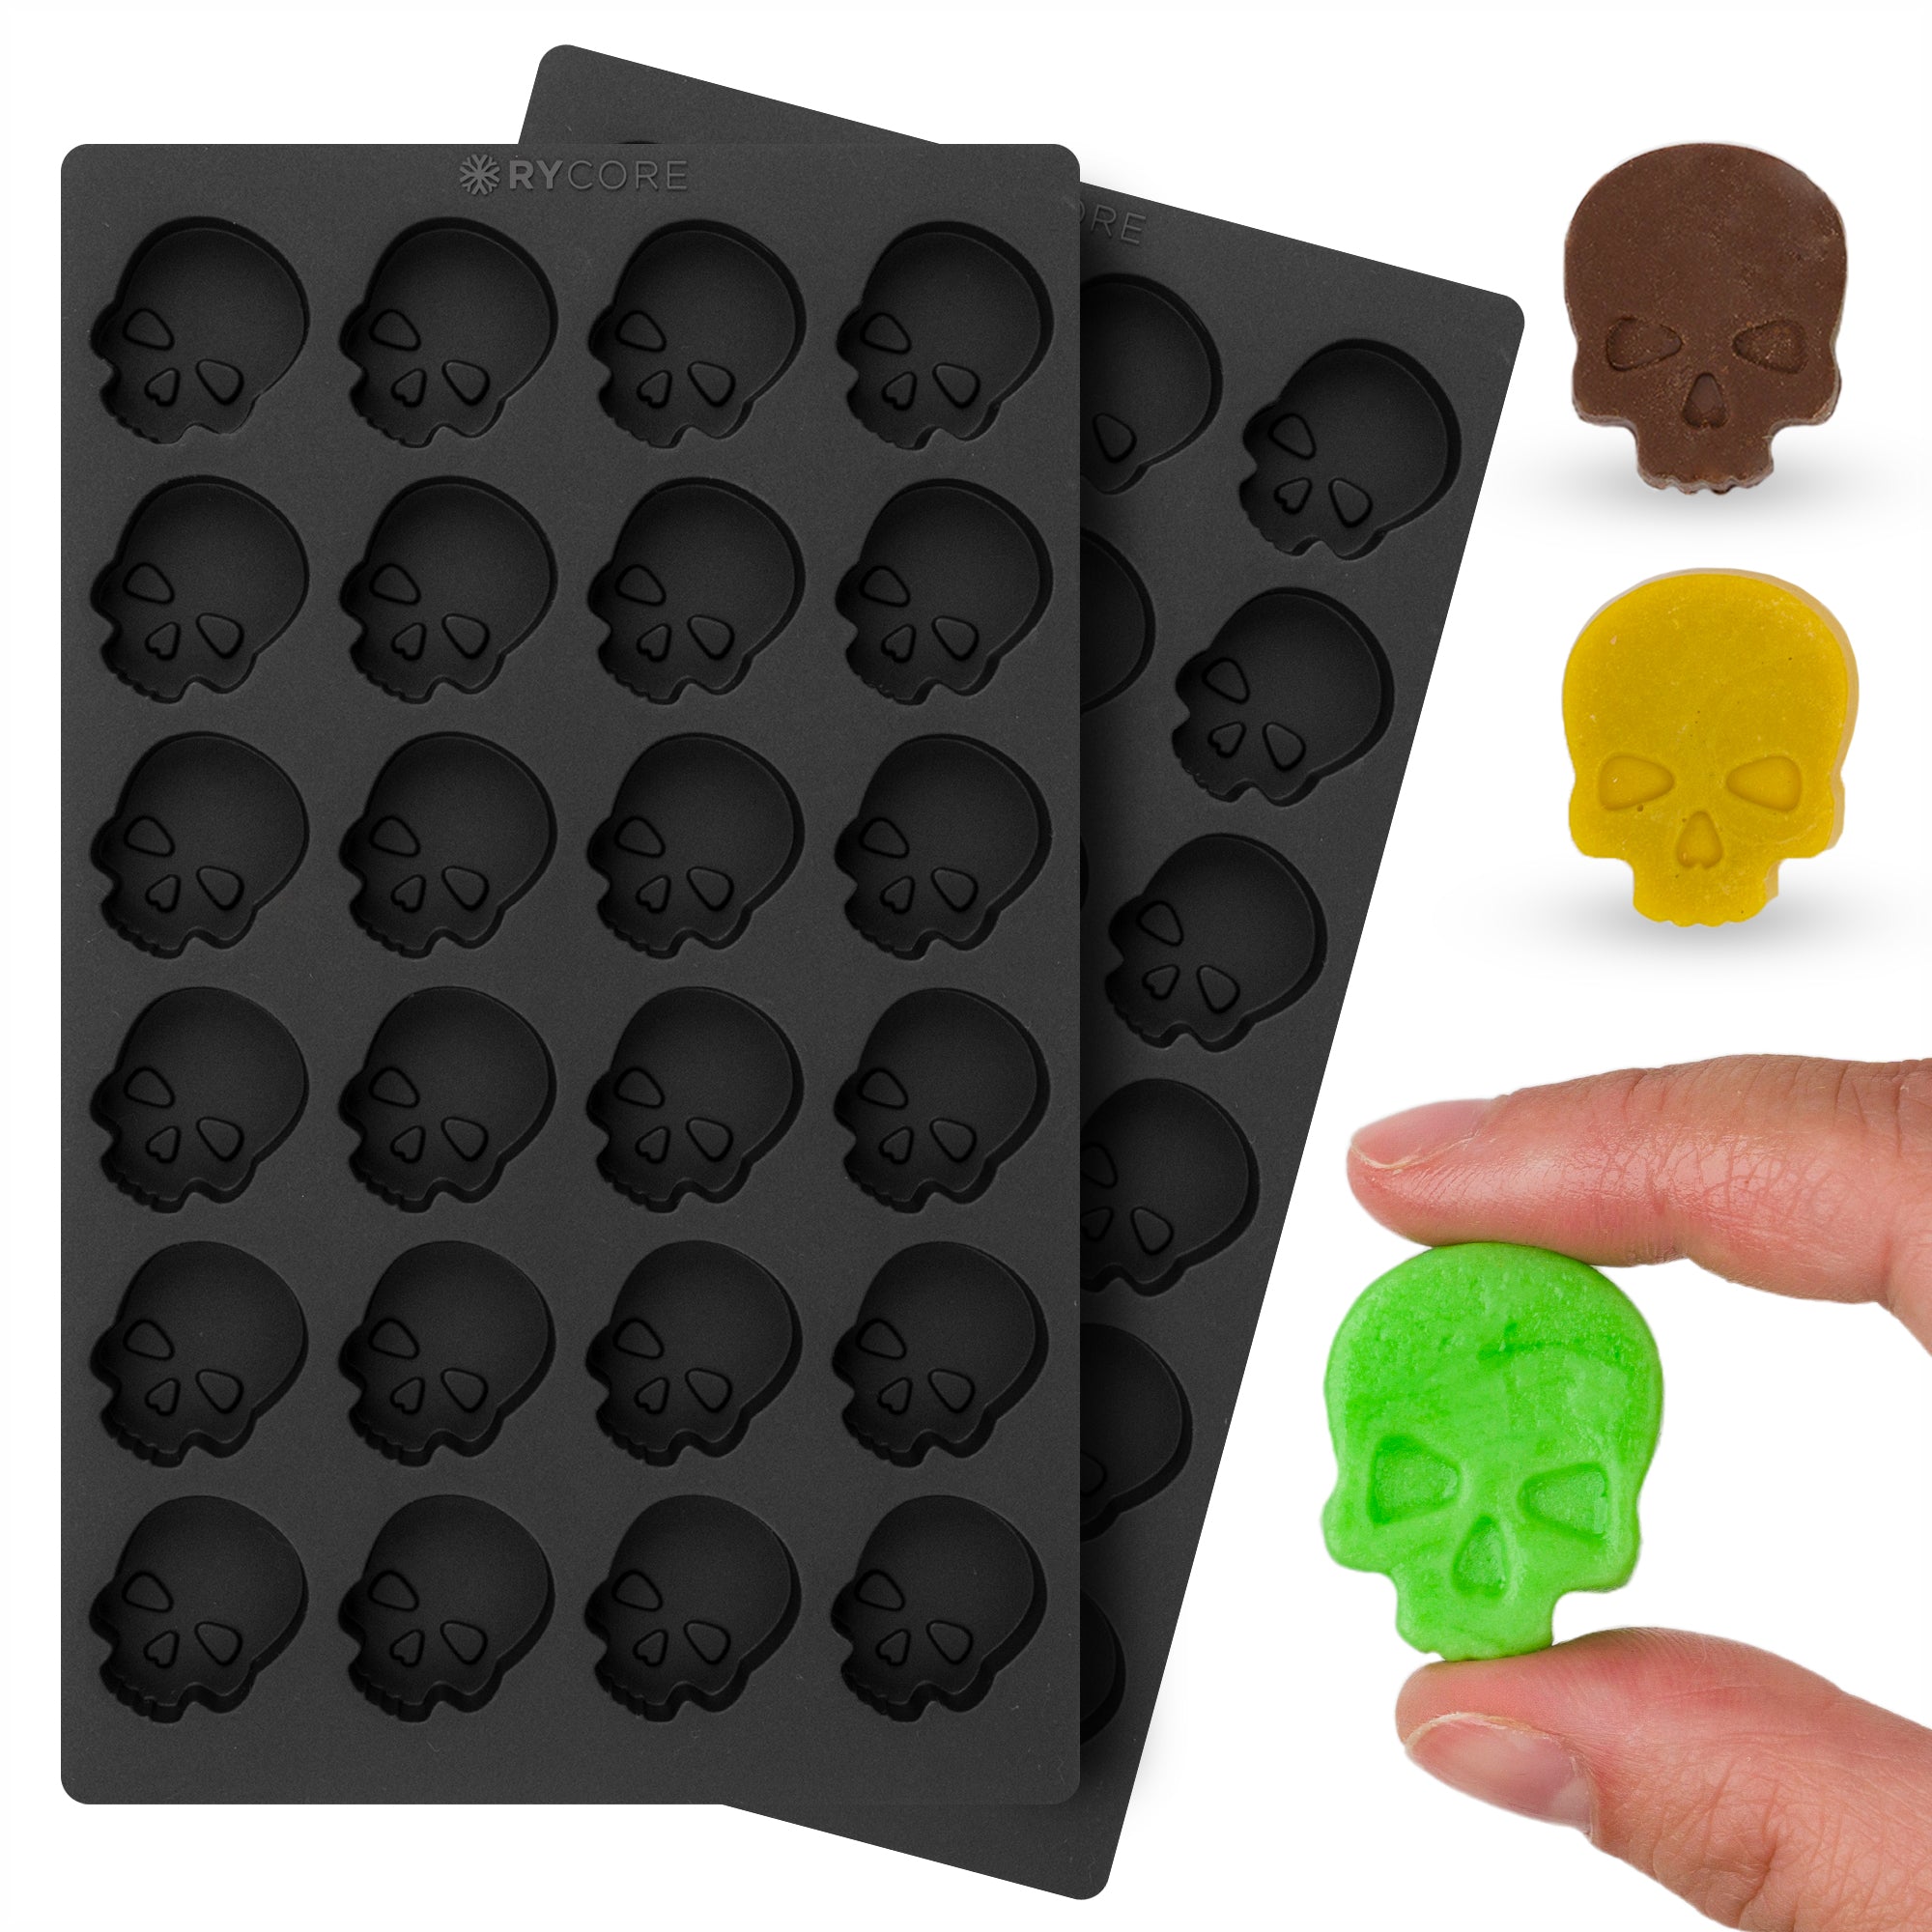 RYCORE Silicone Skull Mold for Baking, Chocolates & Desserts | Mini Mold for Candy | 2 Pack